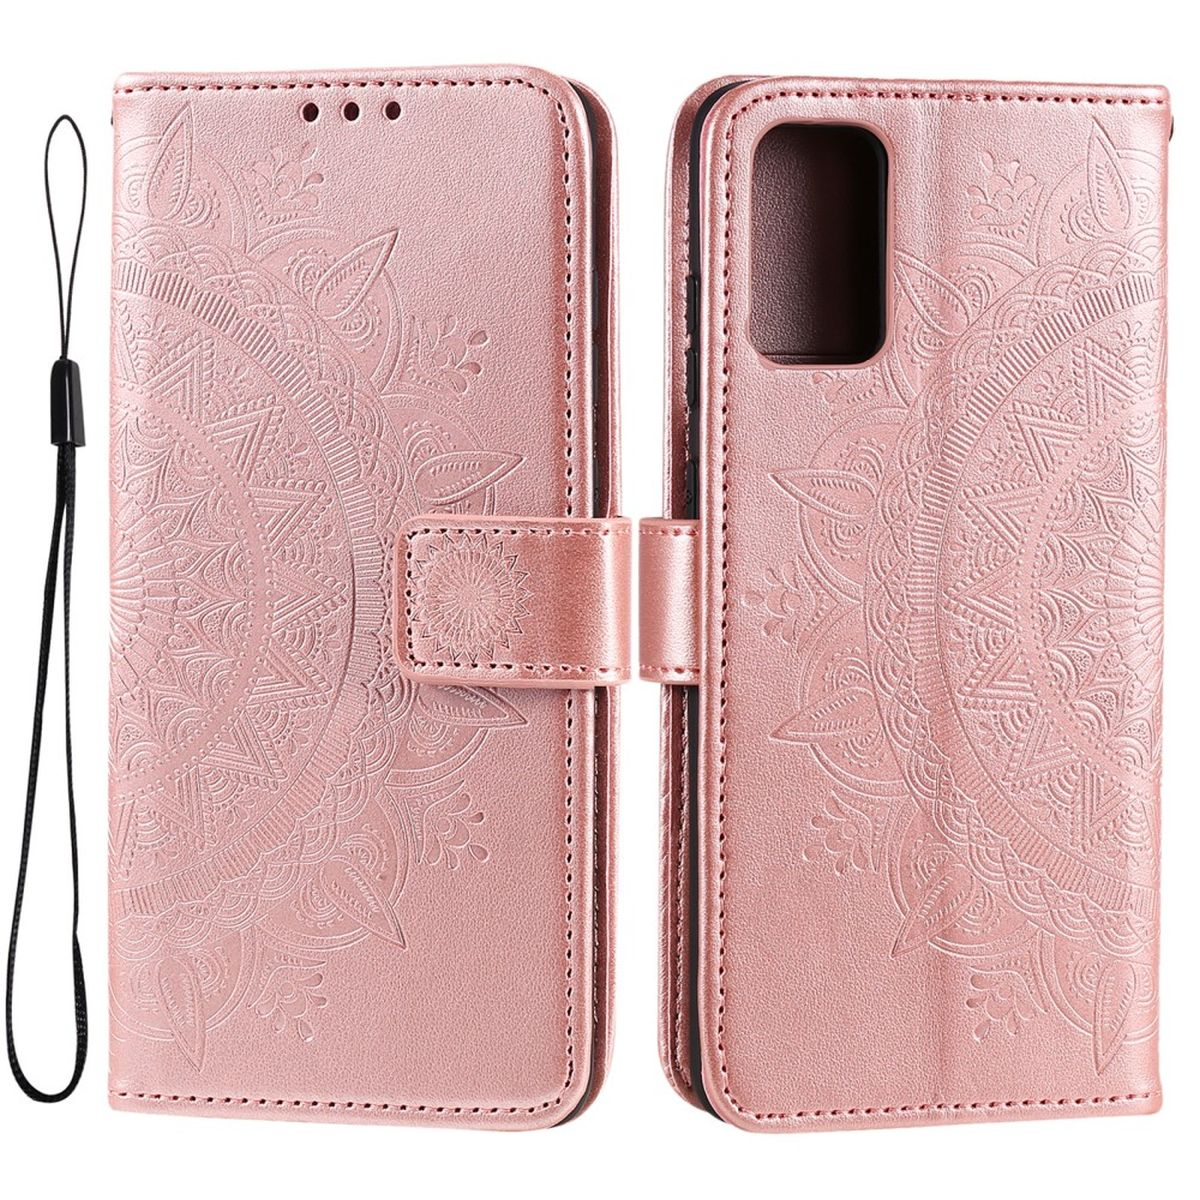 Klapphülle Mandala A33 Muster, Bookcover, Rosegold 5G, mit Galaxy Samsung, COVERKINGZ